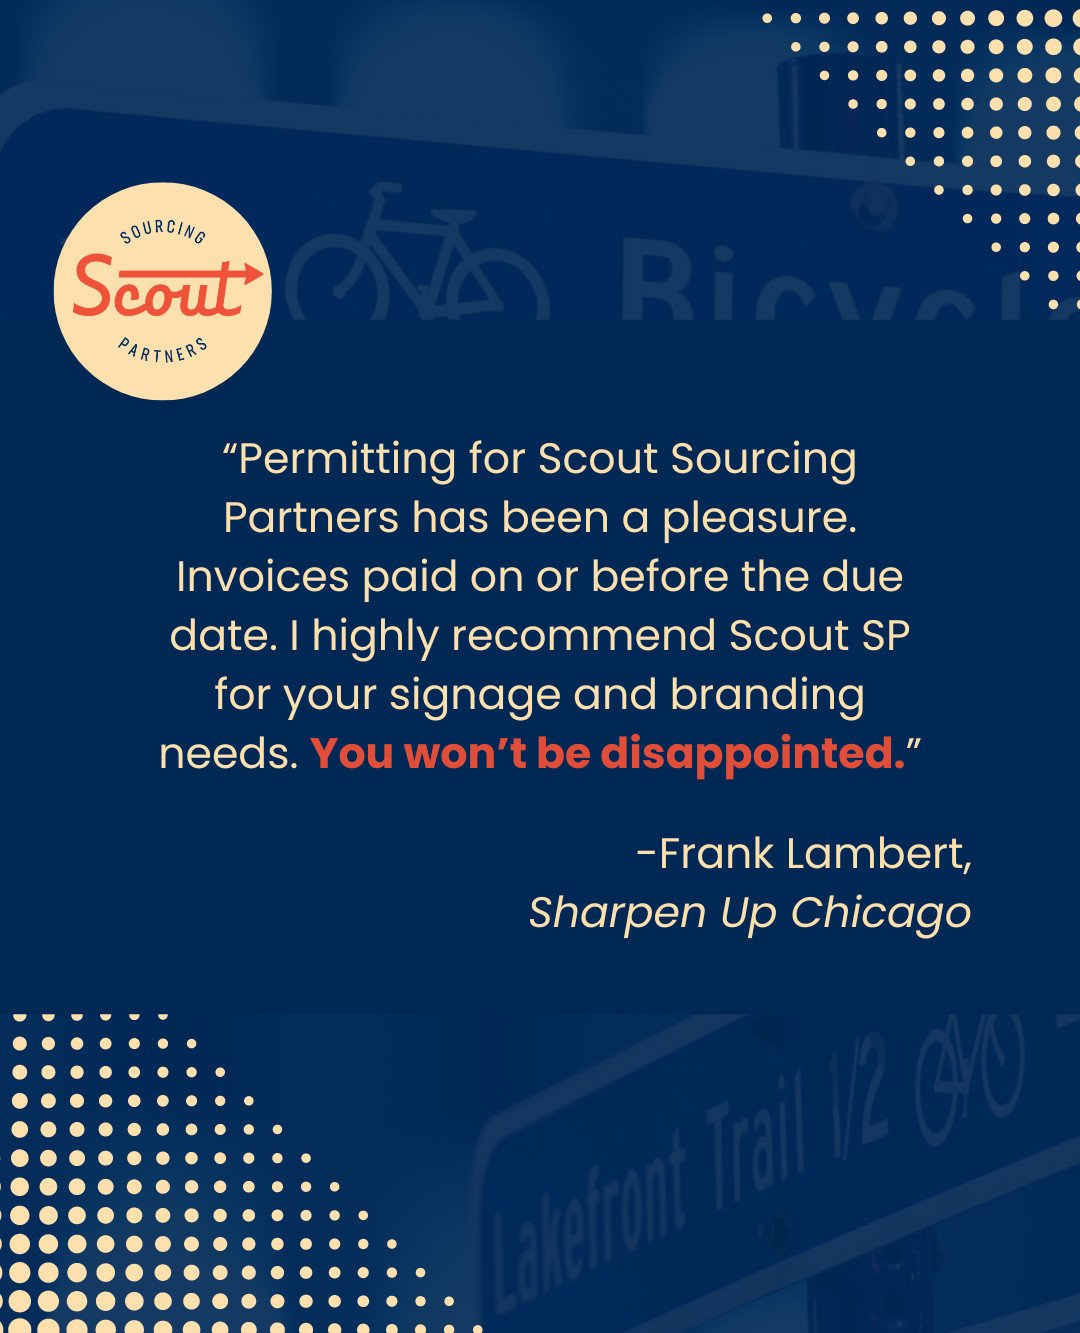 There's nothing like a five-star review. Thank you for partnering with us, Frank! ⭐⭐⭐⭐⭐

#scoutsourcingpartners #signdesign #signage #signcompany #signagemaker #googlereviews